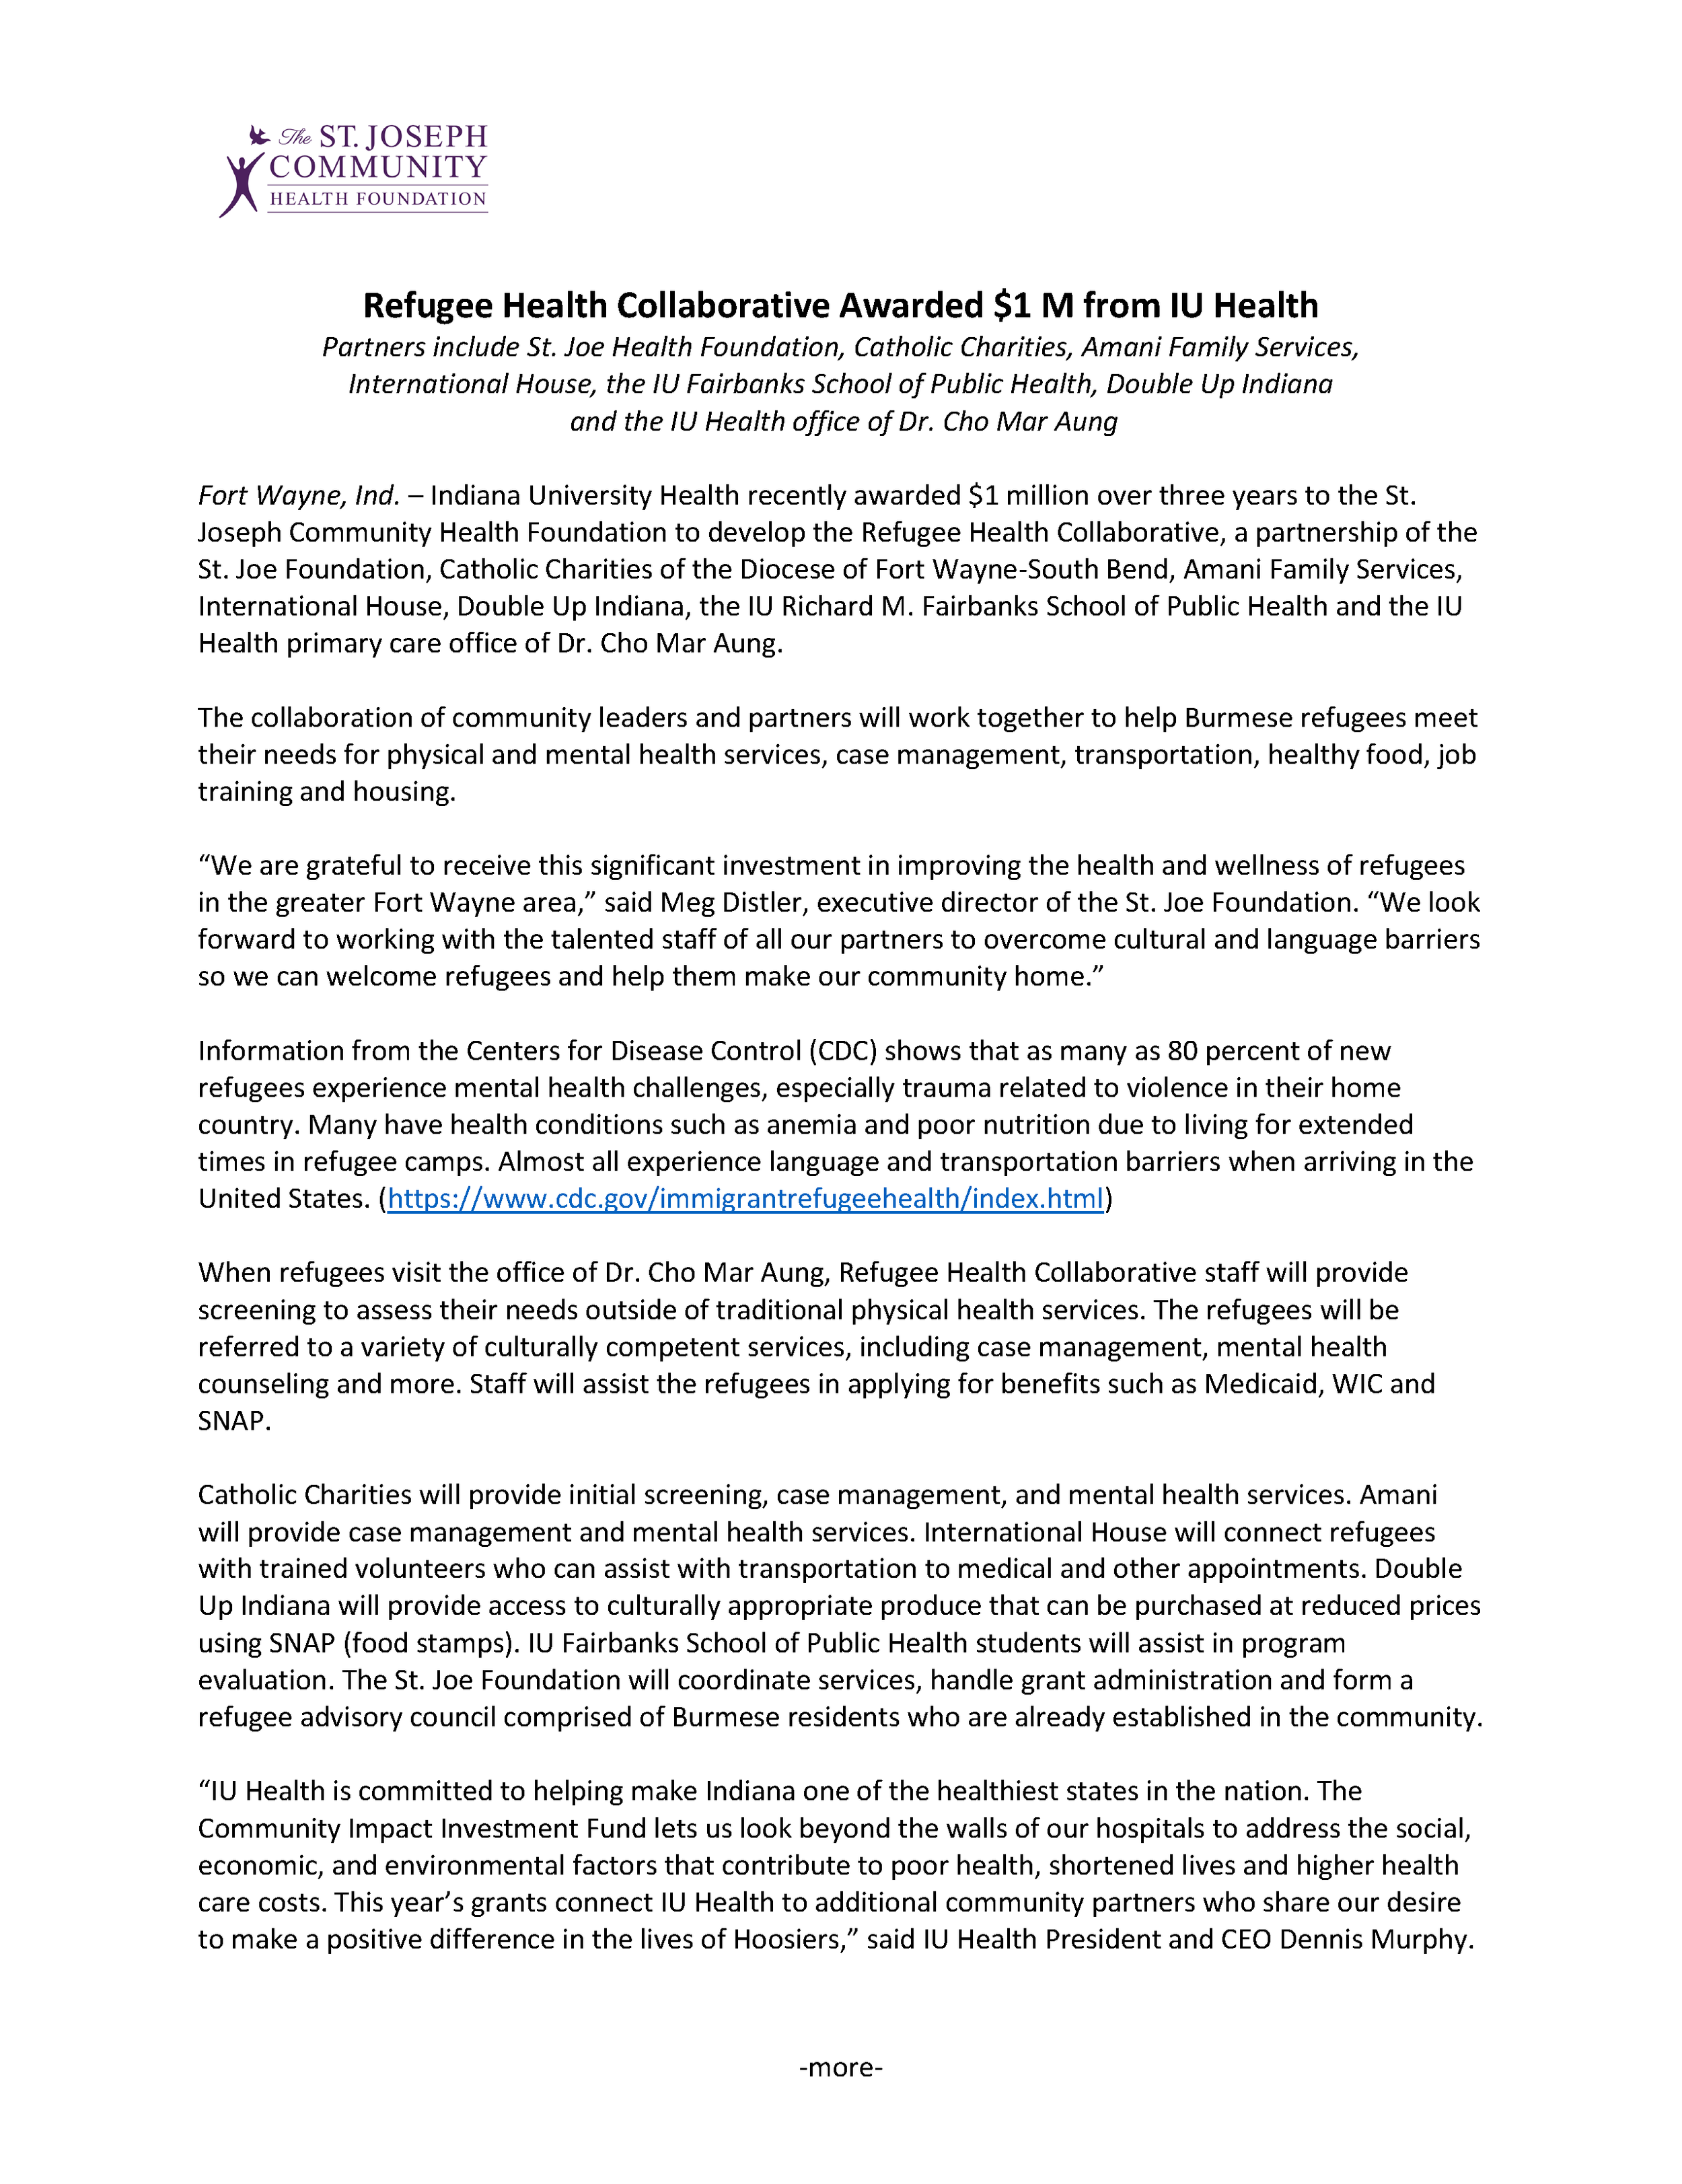 Press Release_IU Health Grant_Page_1.png